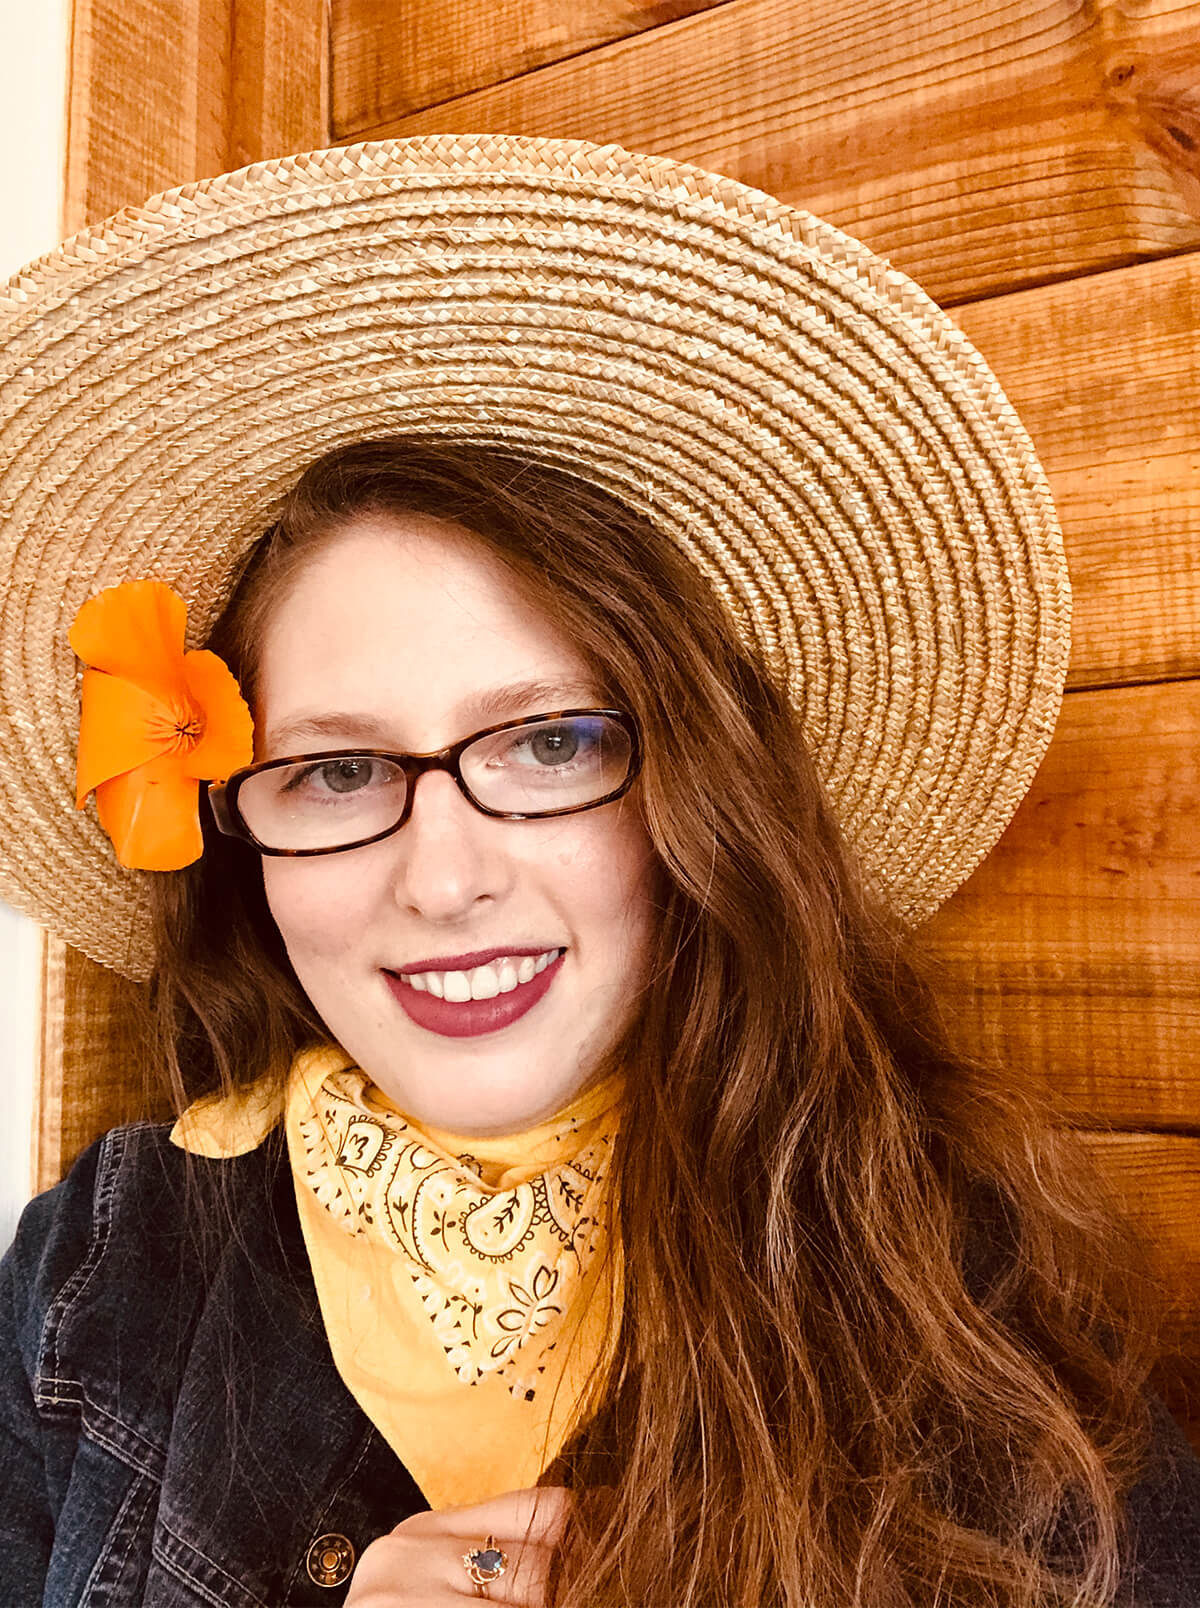 DigiPen MFA graduate Hannah Patten smiles in a straw hat with an orange flower in her hair.